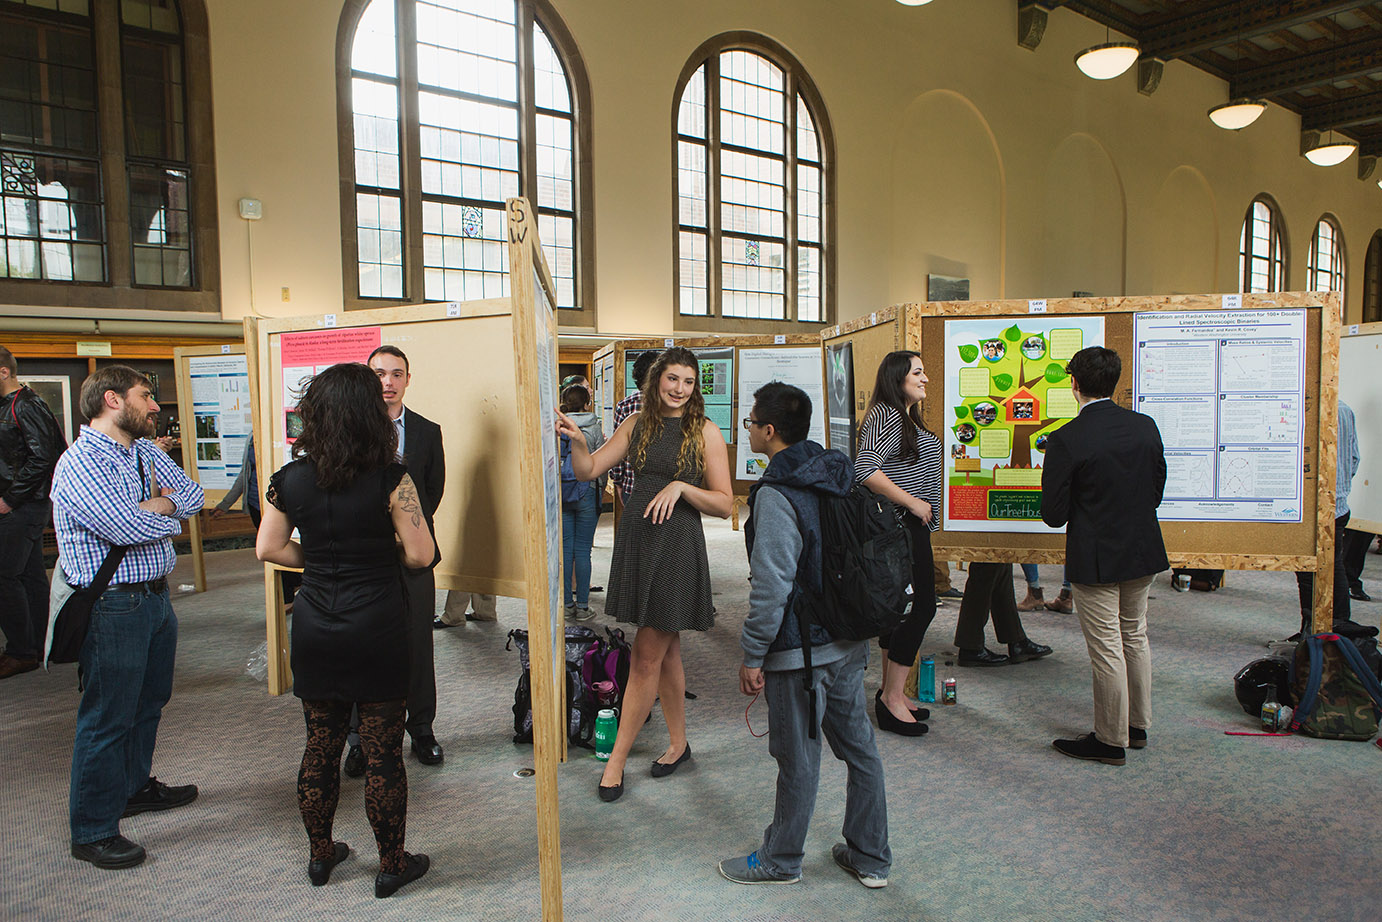 A woman stands in front of academic posters, explaining something to someone standing next to her.